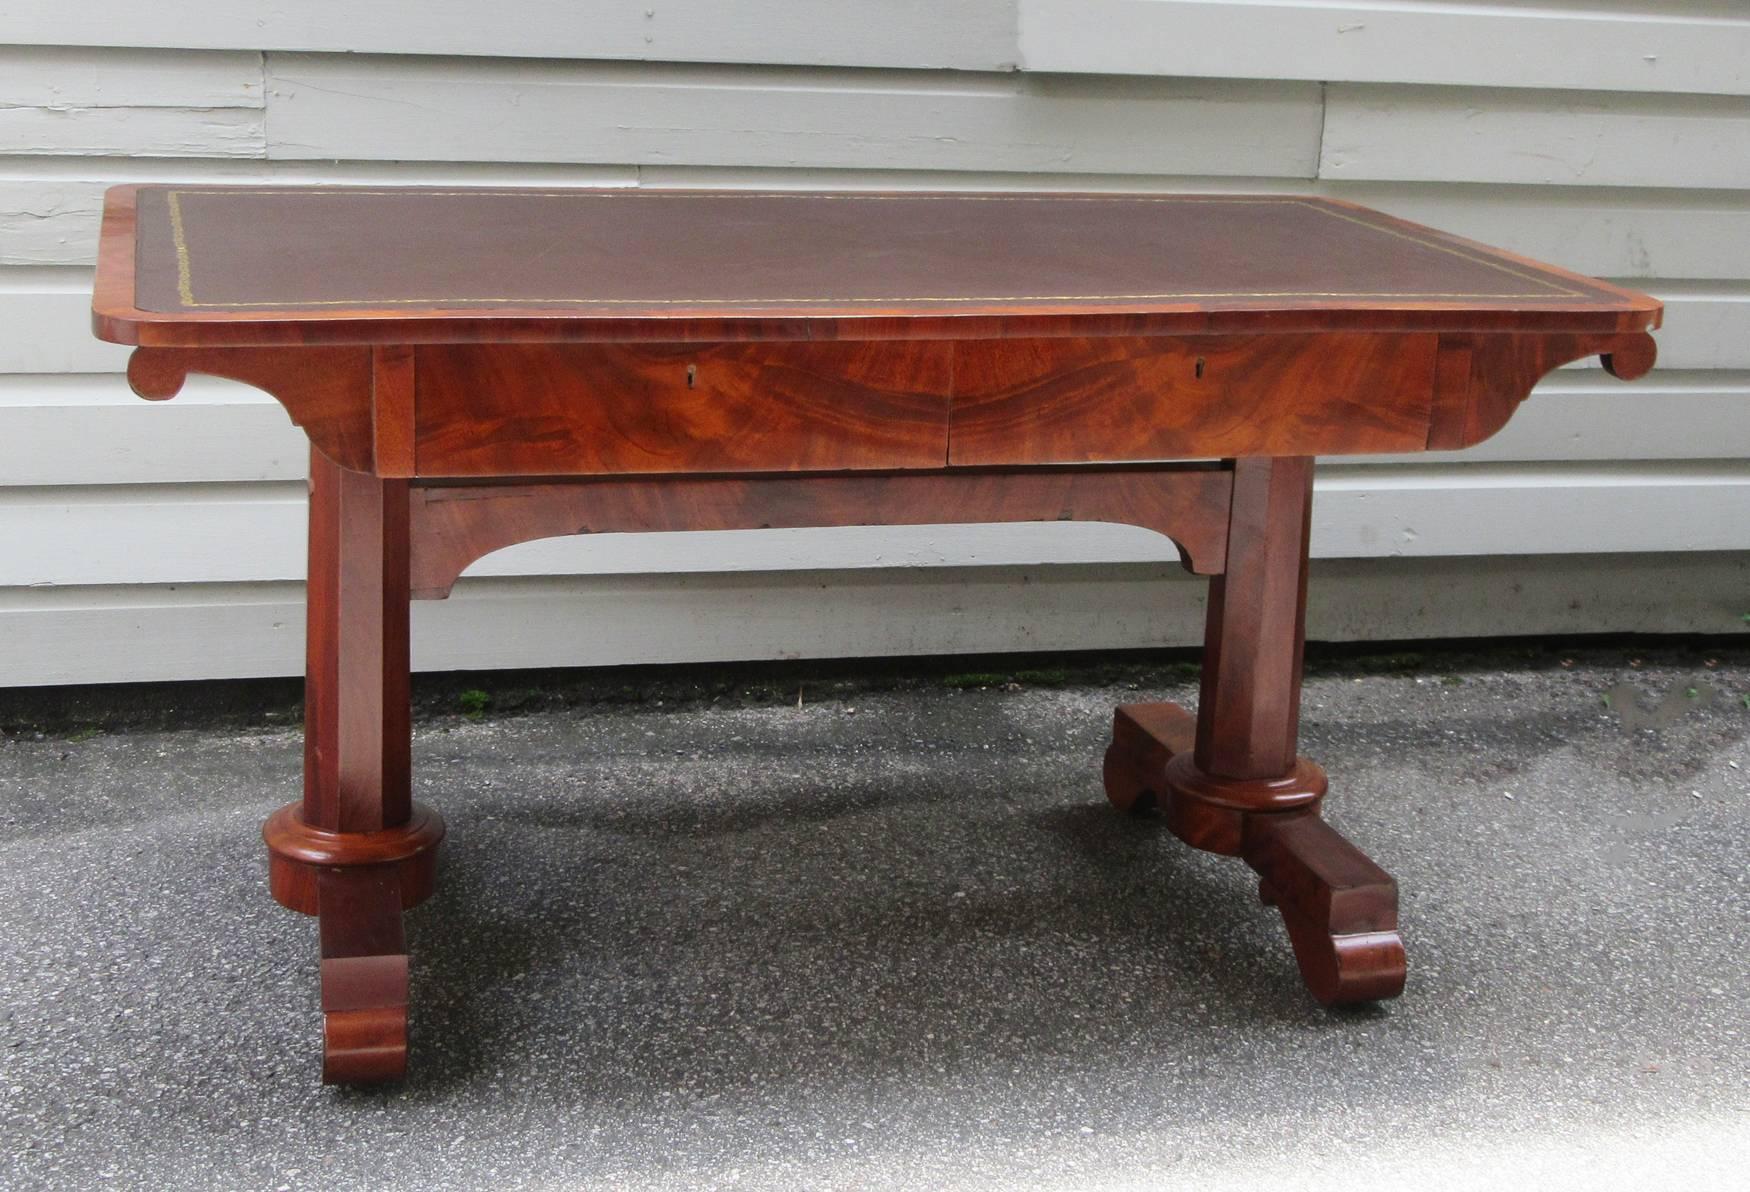 Early 19th Century English Regency Mahogany with Leather Top Desk or Sofa Table 1